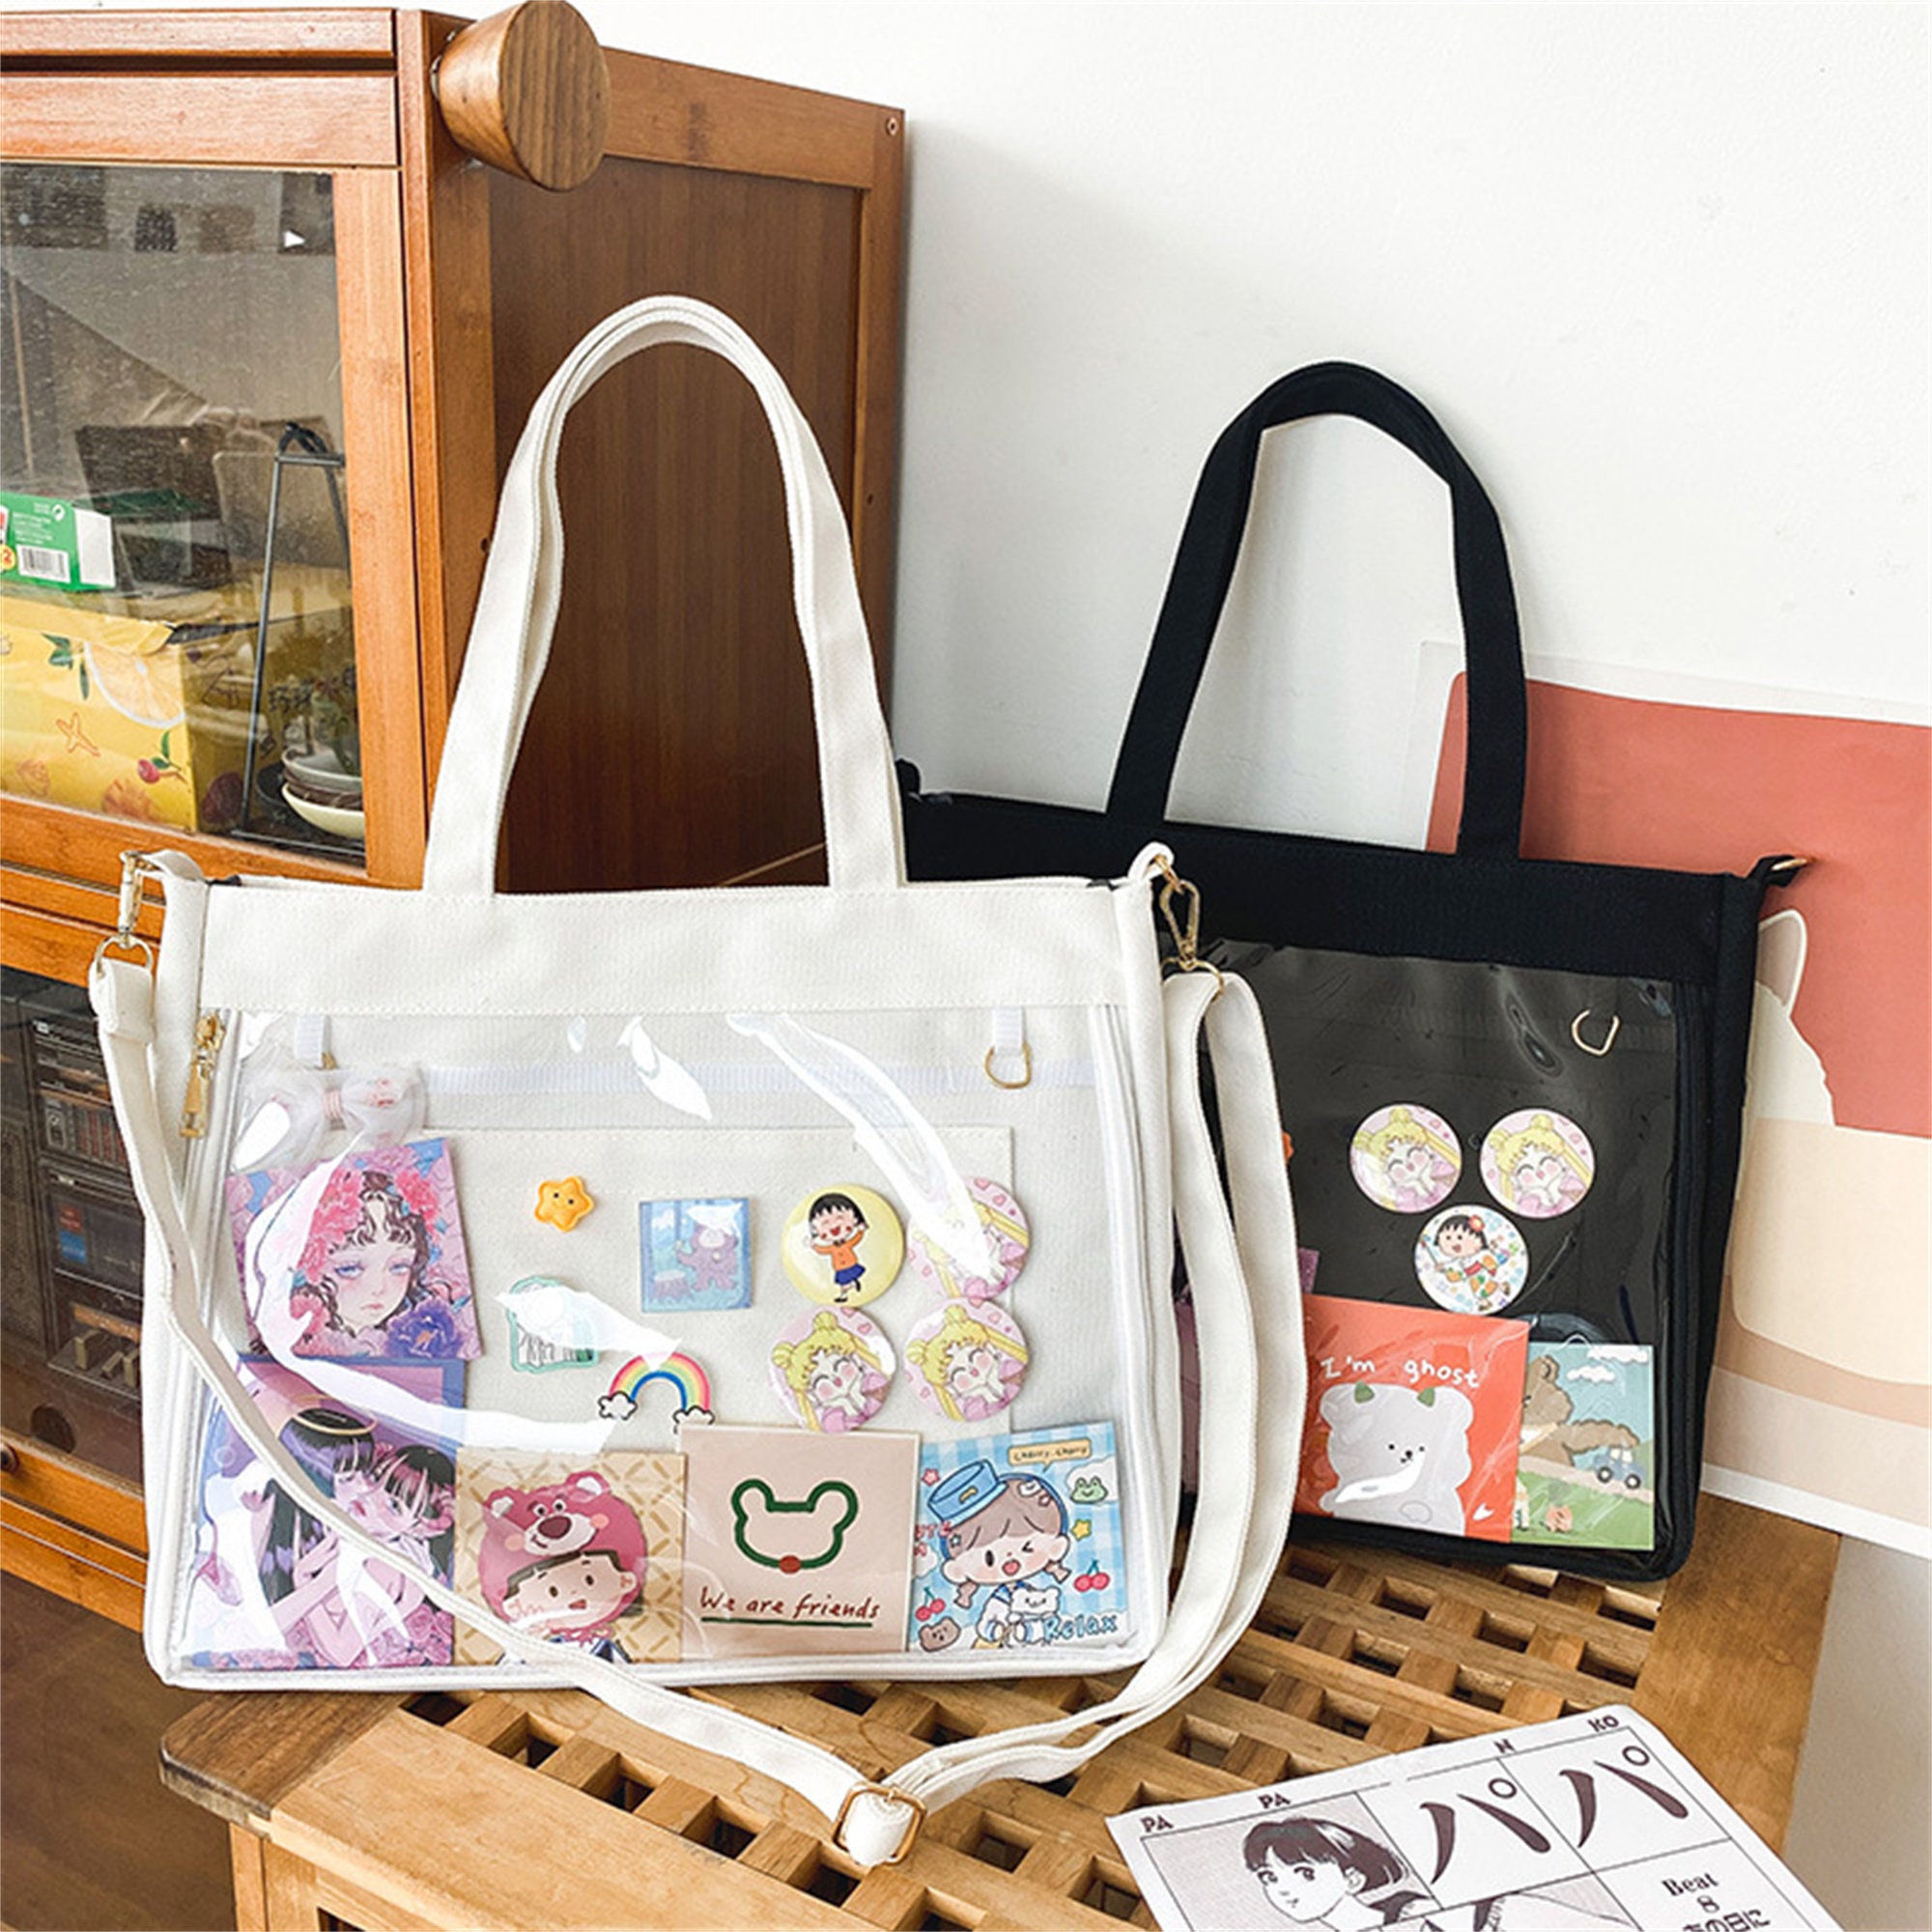 Pin on bags ♥